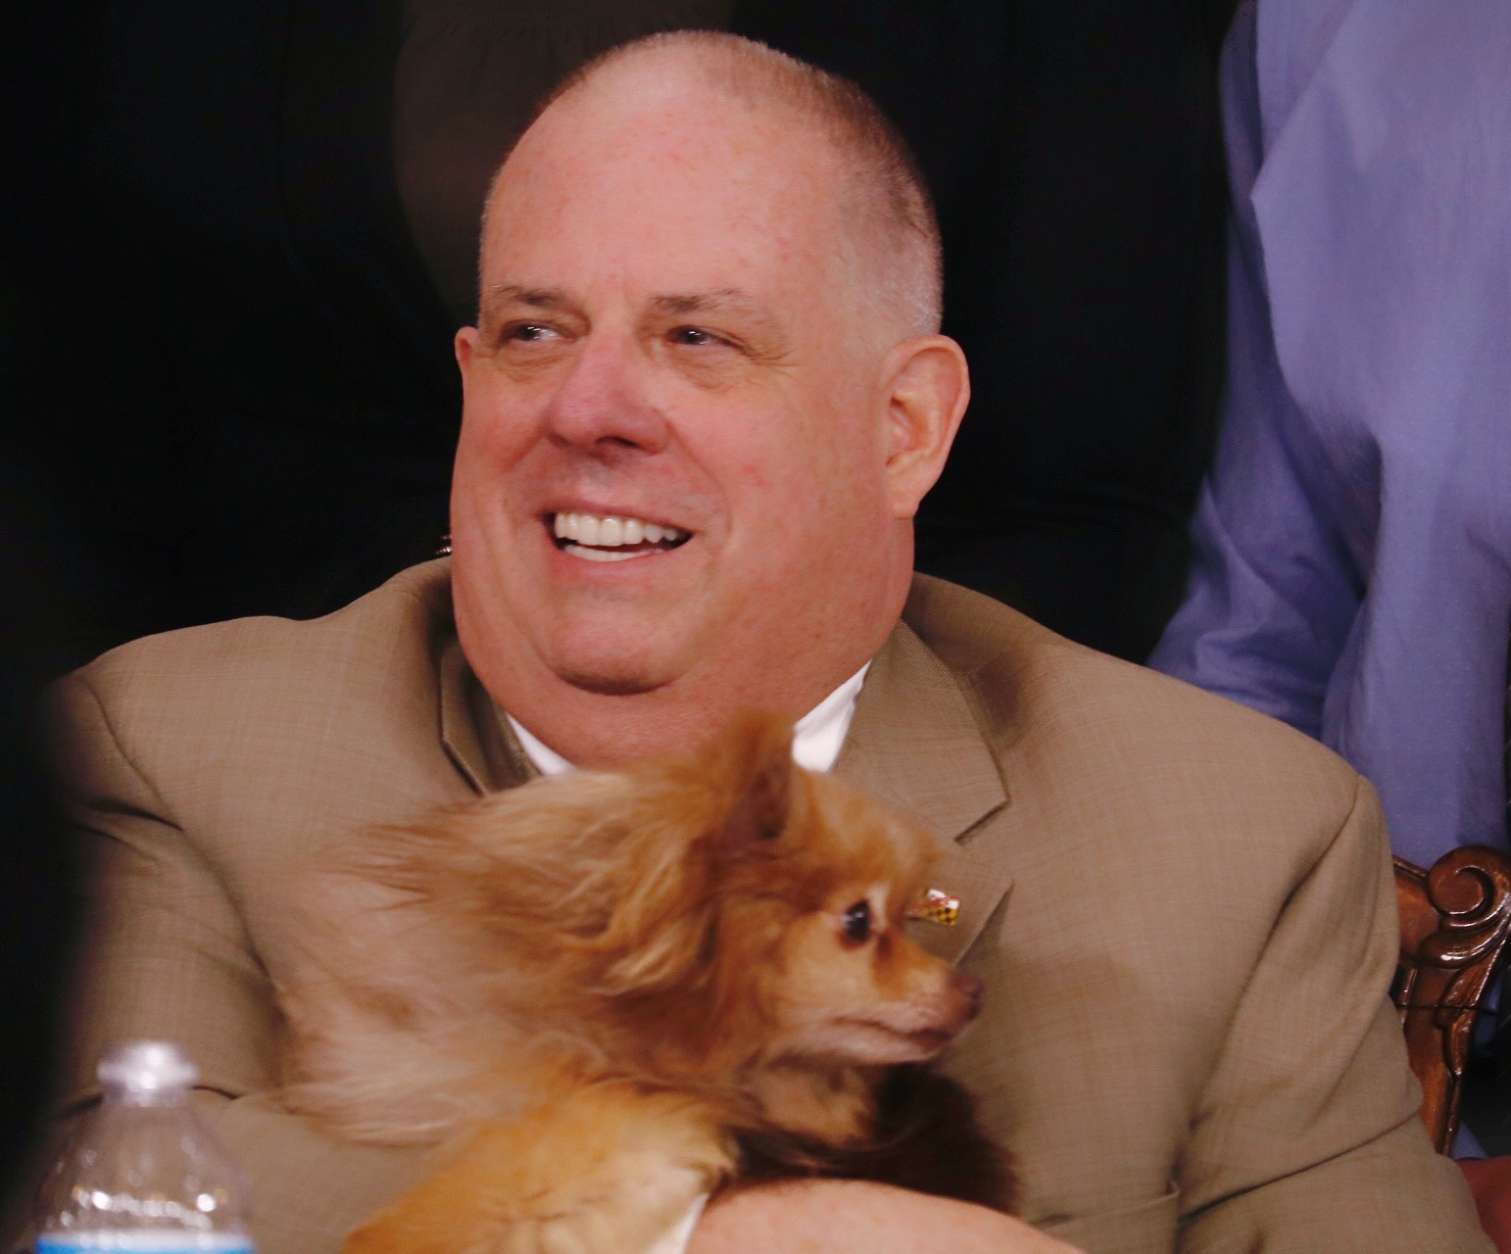 Maryland Gov. Larry Hogan holds one of the dogs from a Maryland animal welfare group before signing a number of bills designed to crack down on "the senseless crime of animal cruelty." Hogan, a dog- lover, asked about the backgrounds of many of the dogs. Lexi, Maryland's "First Dog," passed away in December. Hogan indicated he'd like to get another dog in the future. For now, he said of the presence of dogs at the bill-signing ceremony, "We should have dogs here every day!" (WTOP/Kate Ryan)